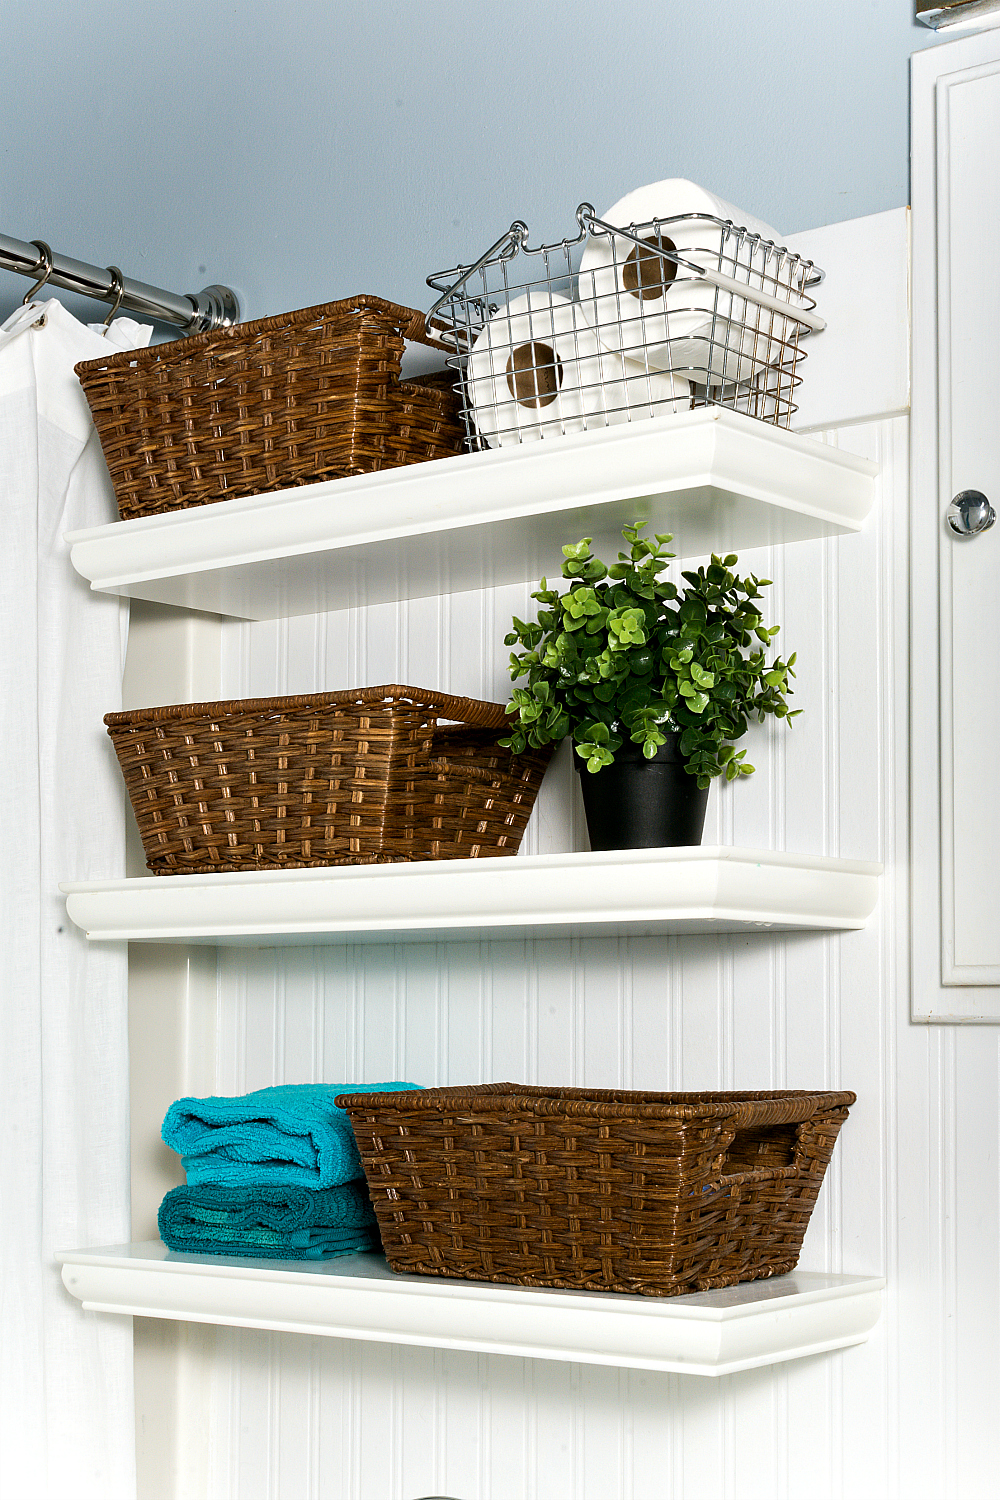 shelves with baskets to organize items. Decorated with faux plants and colorful towels